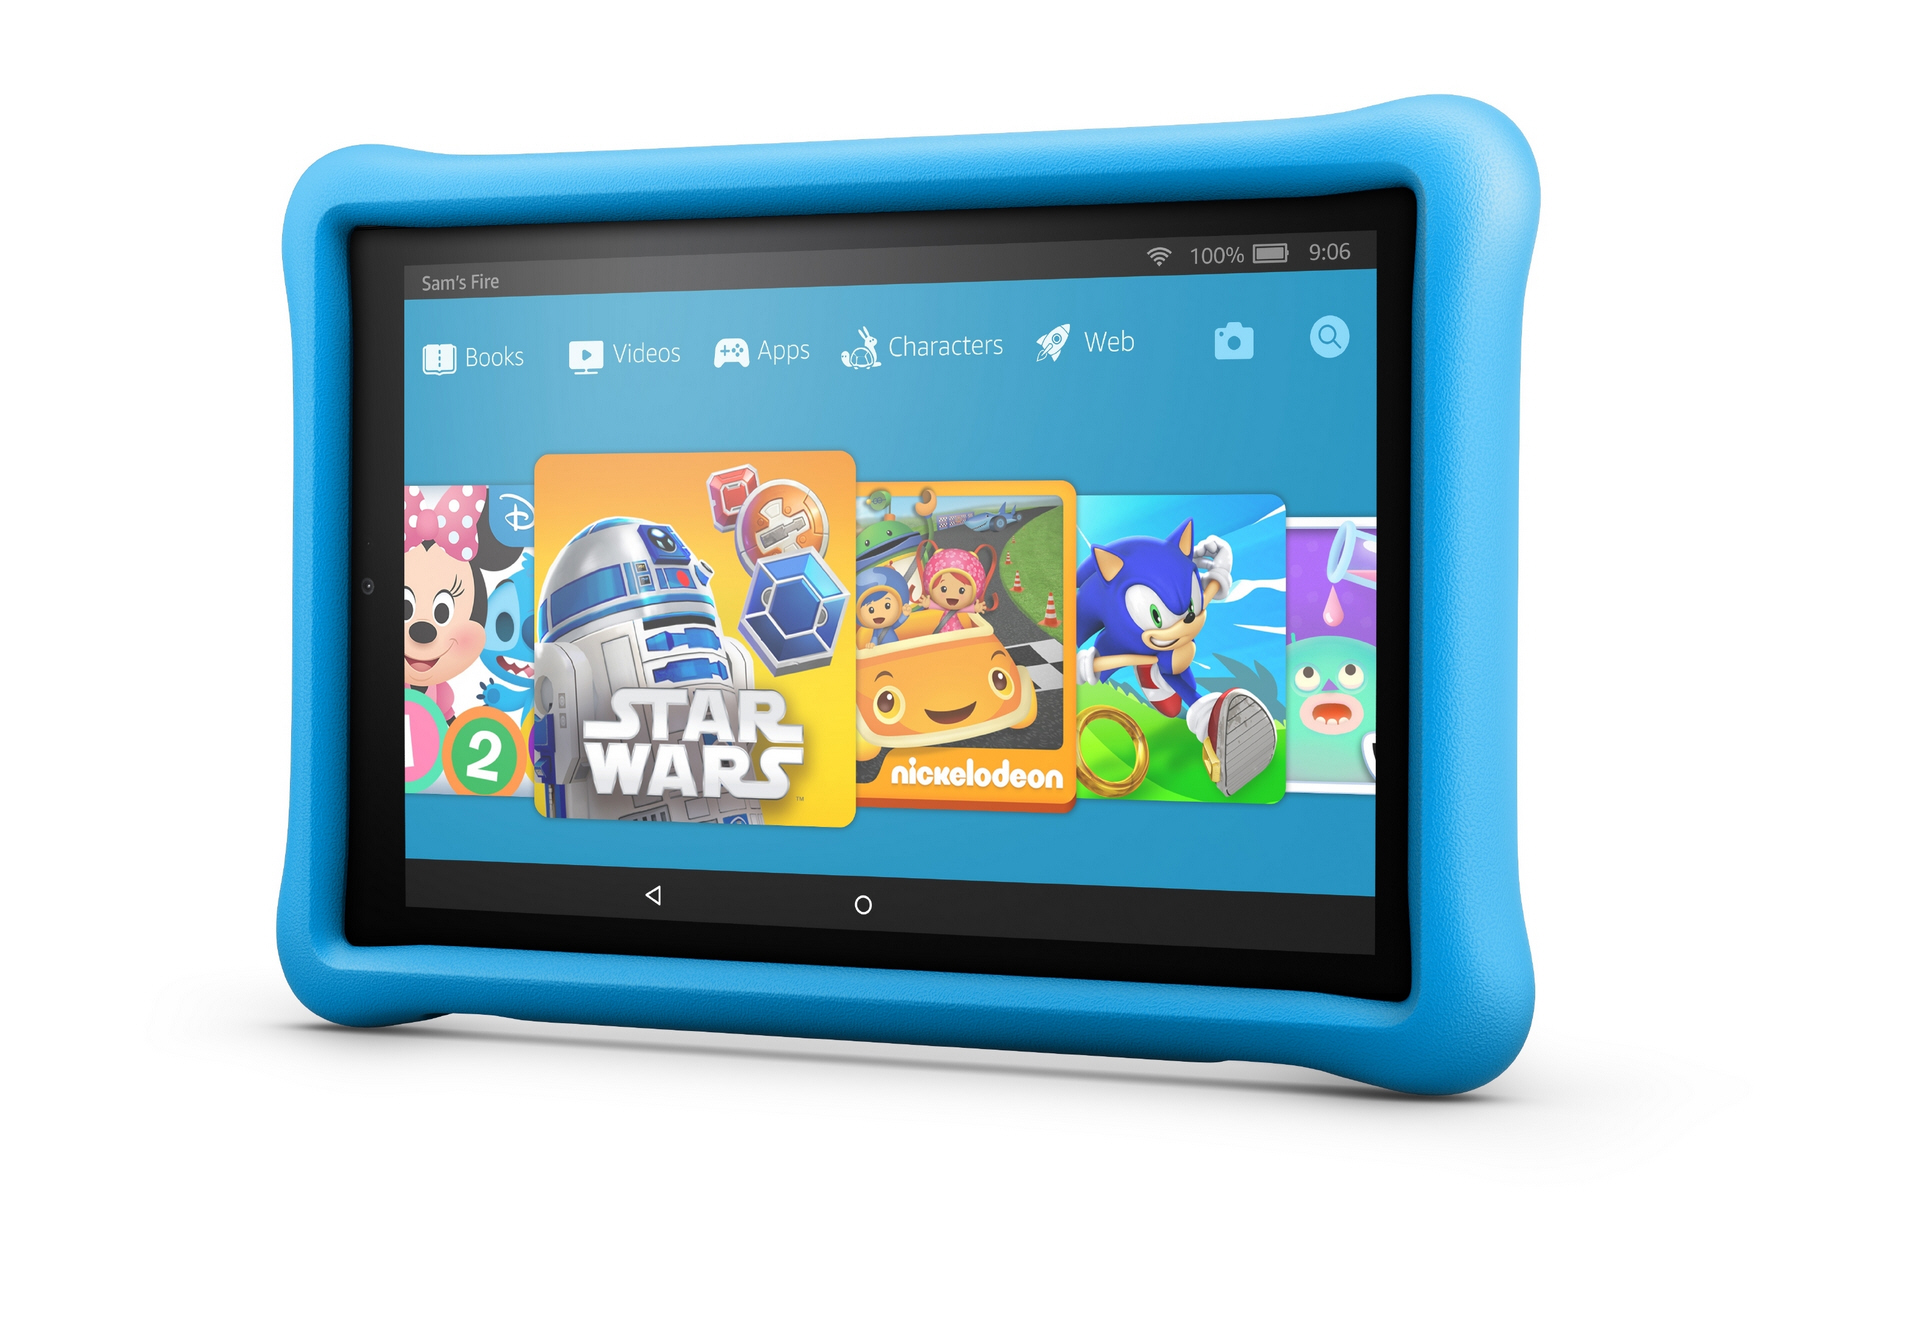 Amazon introduces its largest and fastest tablet for kids